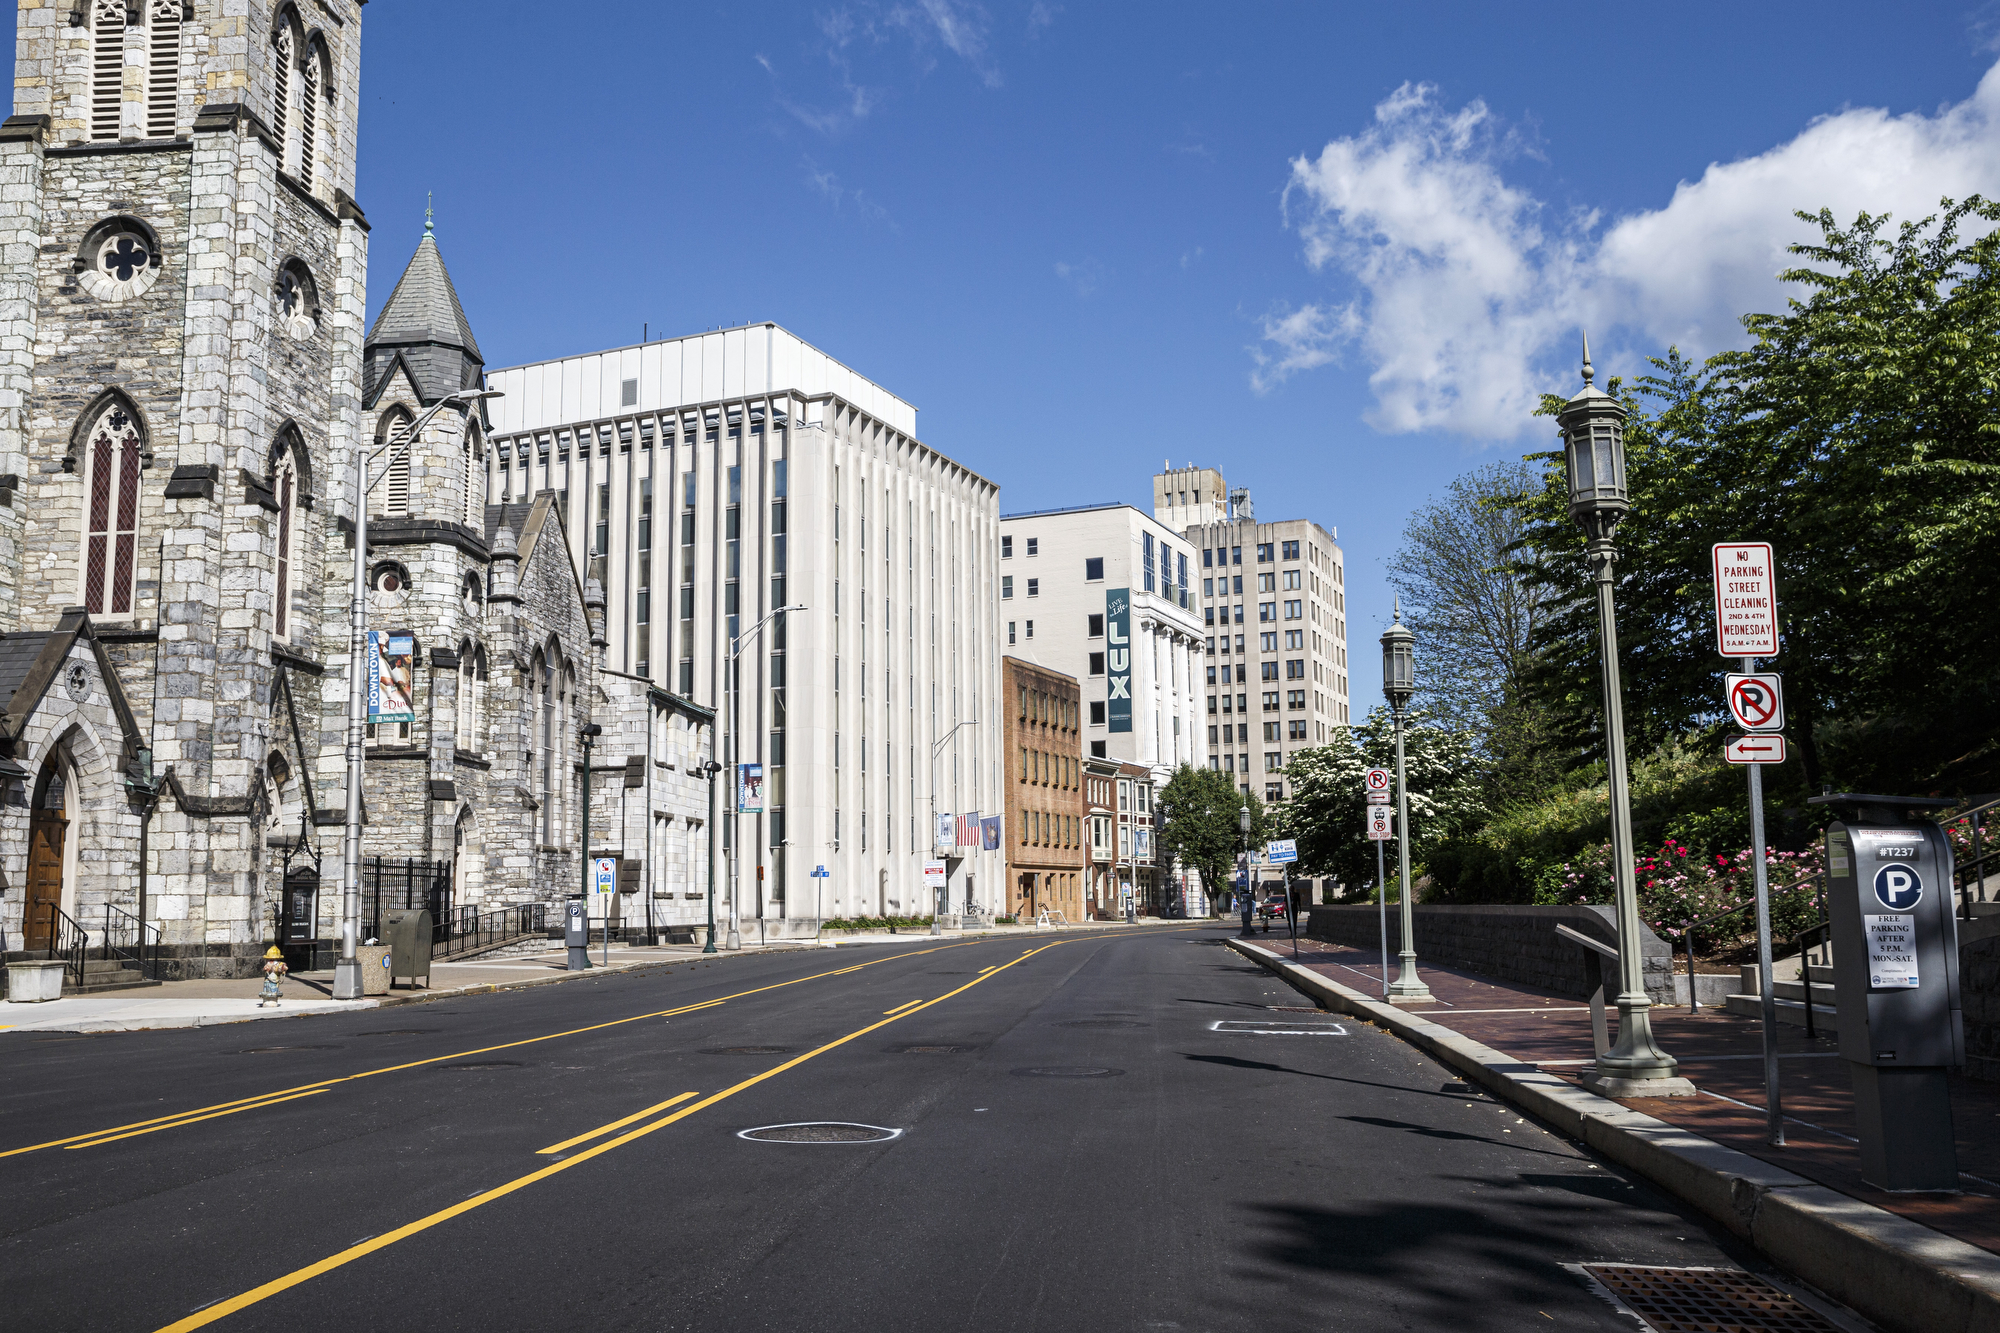 Third Street in Harrisburg. The streets of Harrisburg the day after protests over the death of George Floyd turned violent.
May 31, 2020. 
Dan Gleiter | dgleiter@pennlive.com